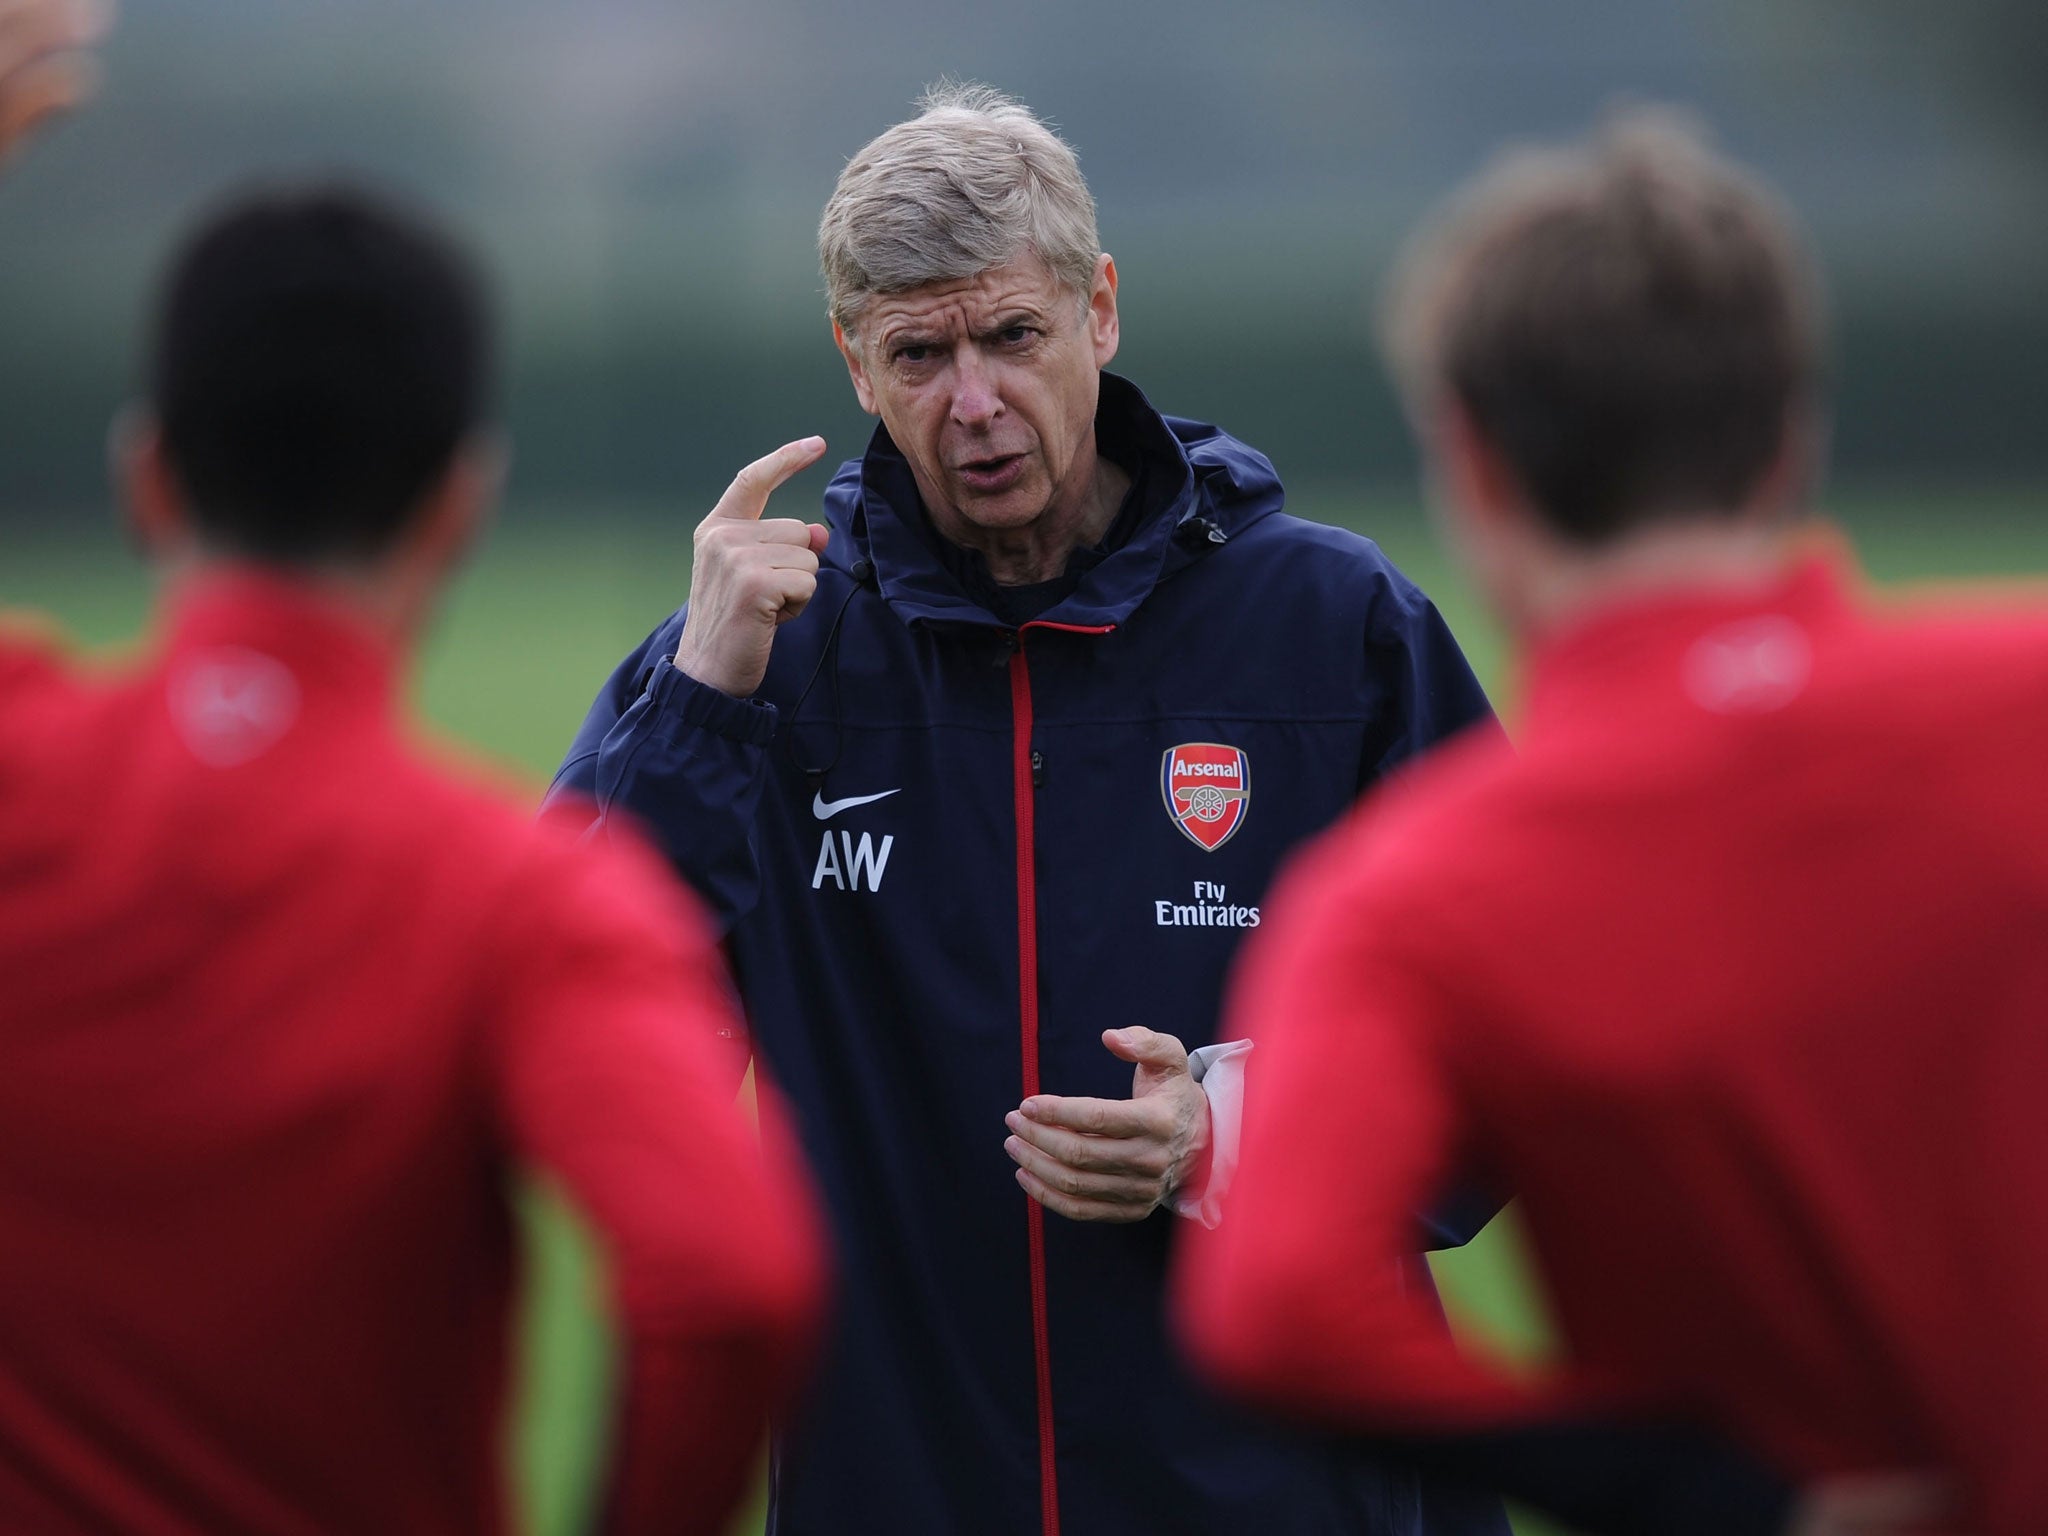 Arsène Wenger hopes that his new team - mobile, nimble and smart - will be on the right side of history once again